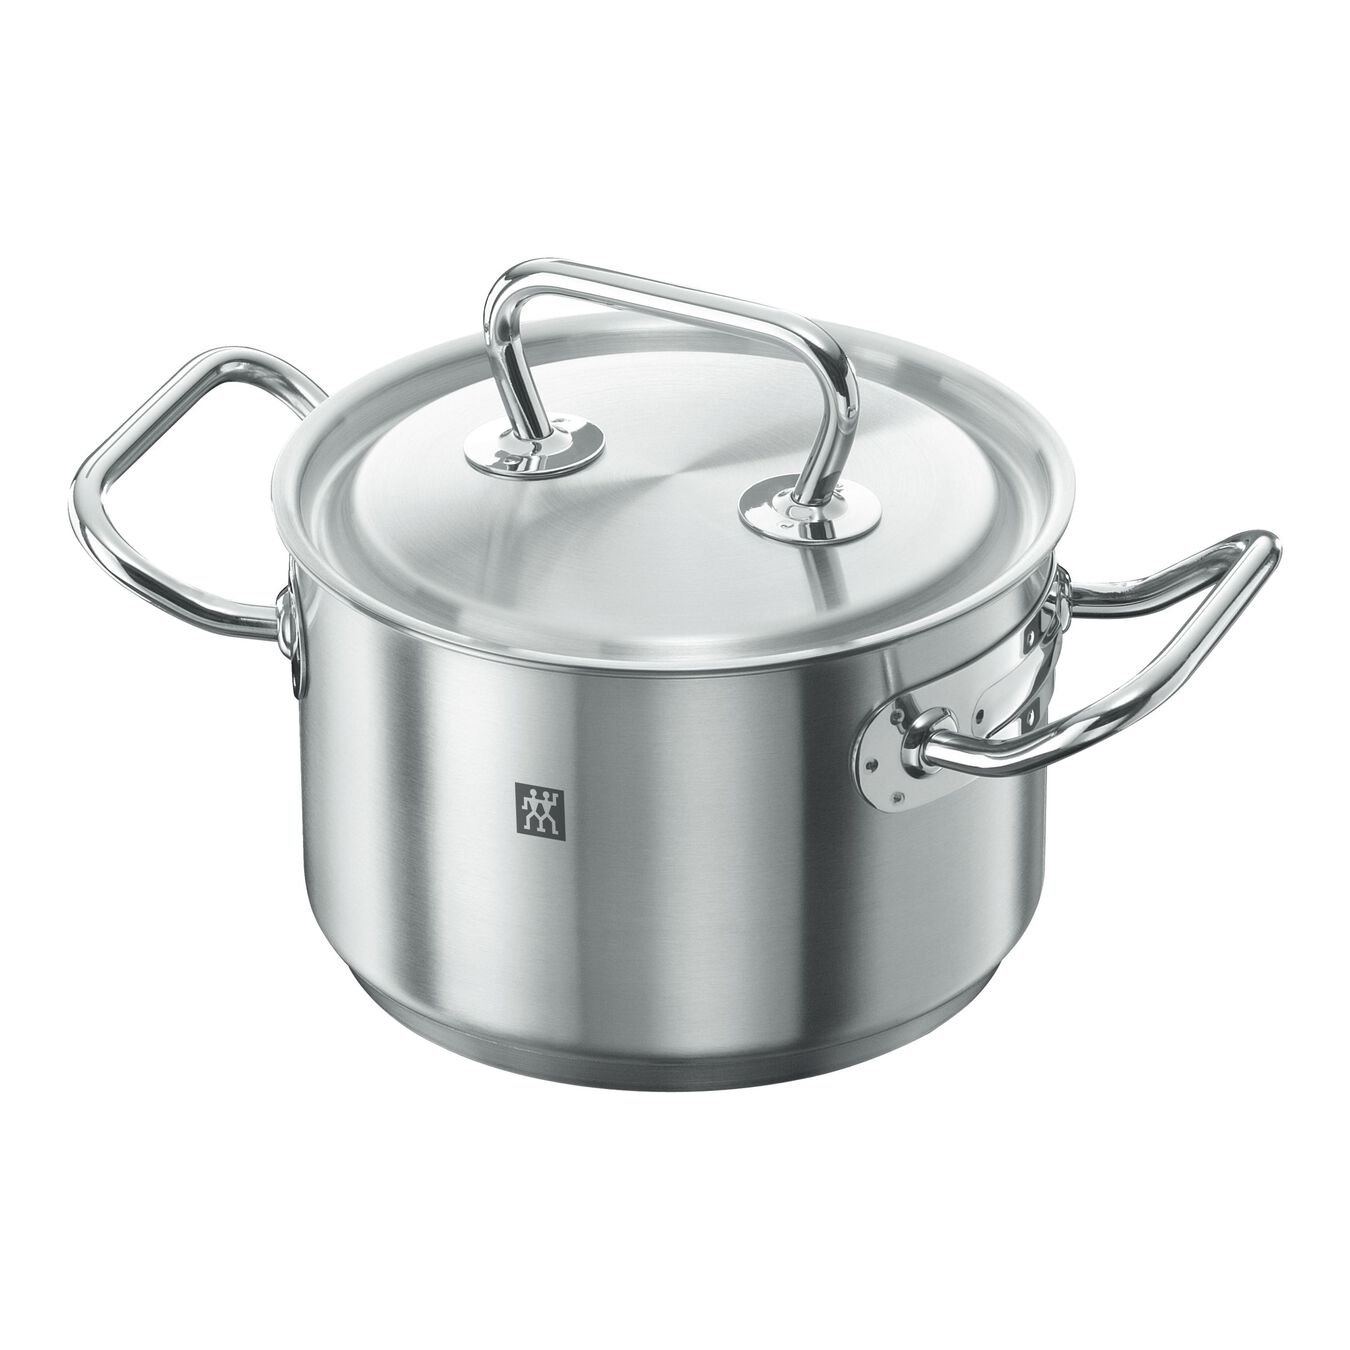 16 cm 18/10 Stainless Steel Stock pot,,large 1